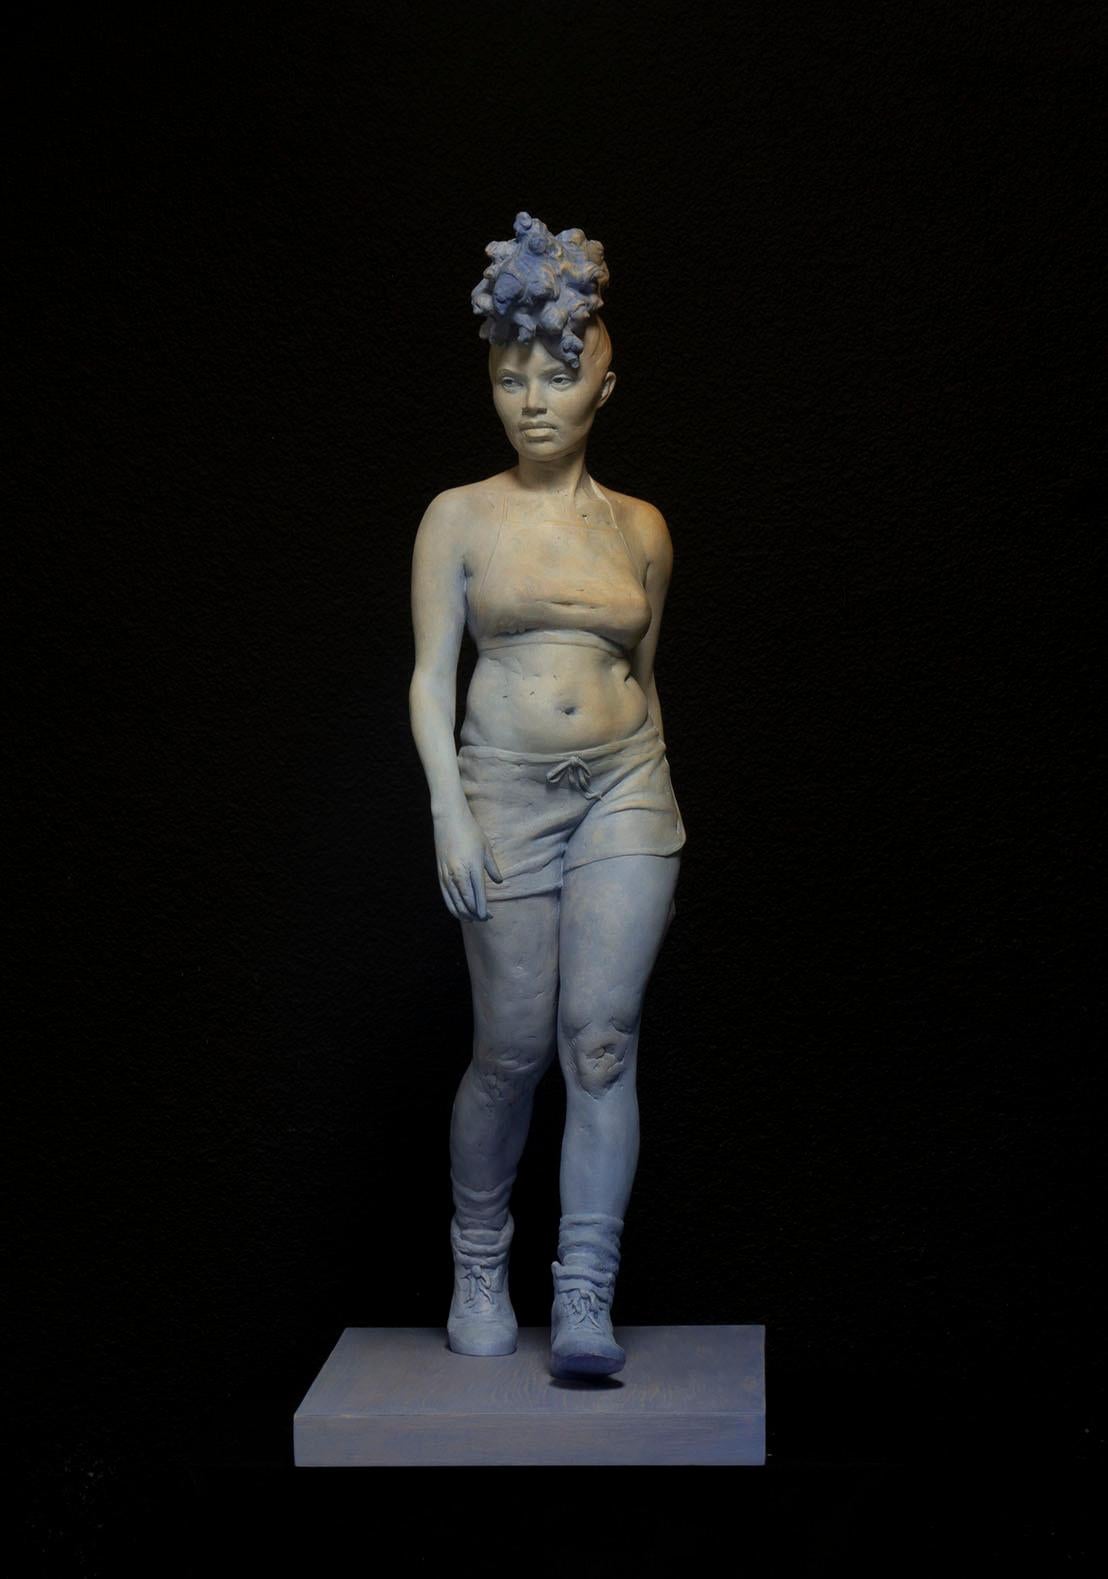 Miss Independent  - Sculpture by Brittany Ryan 